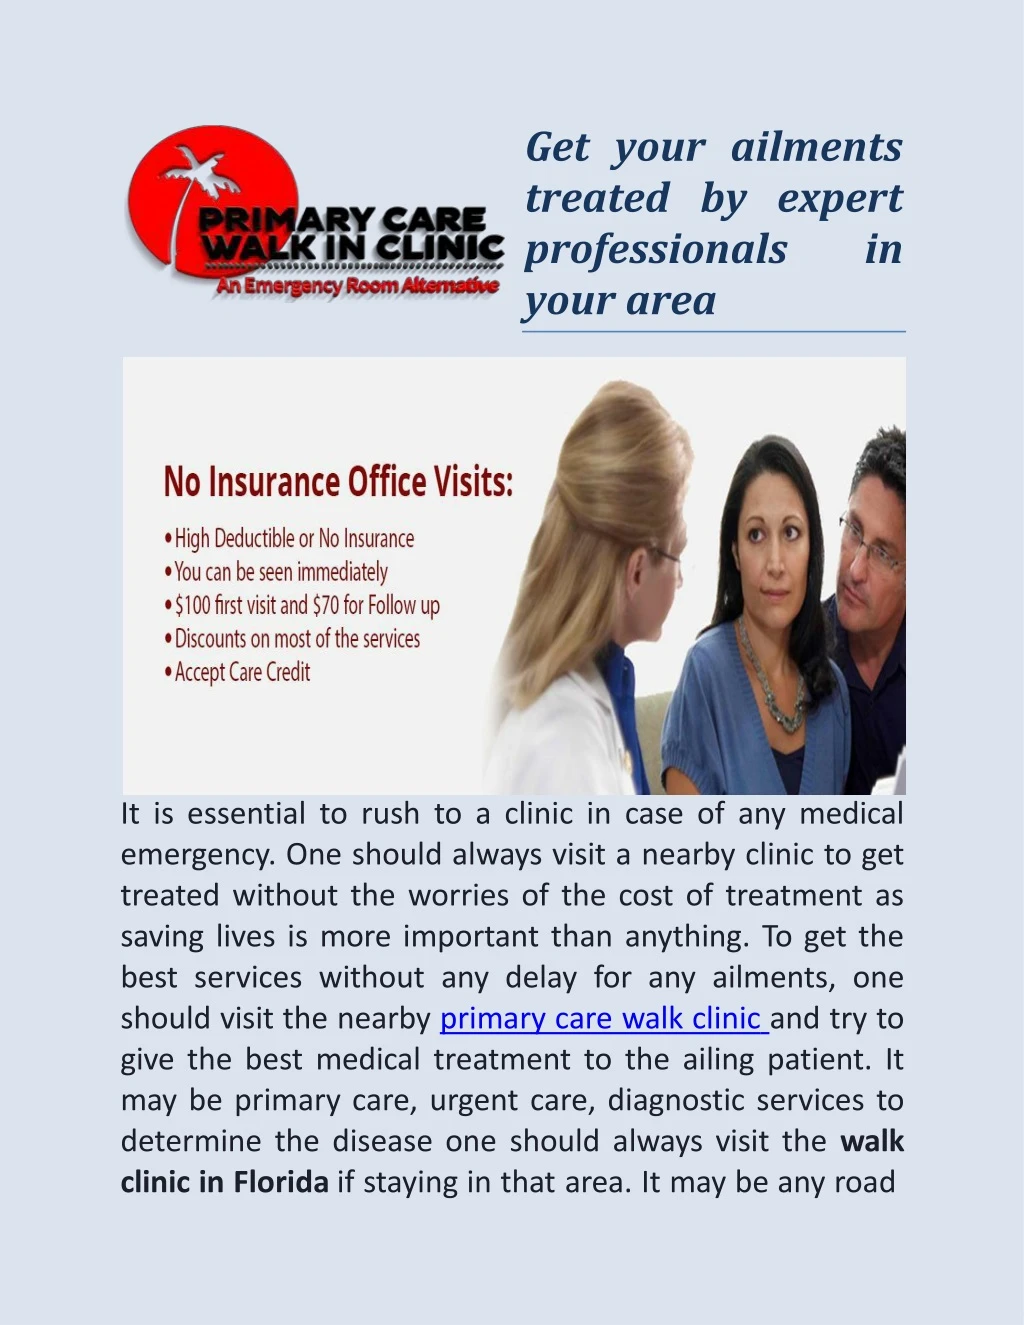 get your ailments treated by expert professionals in your area